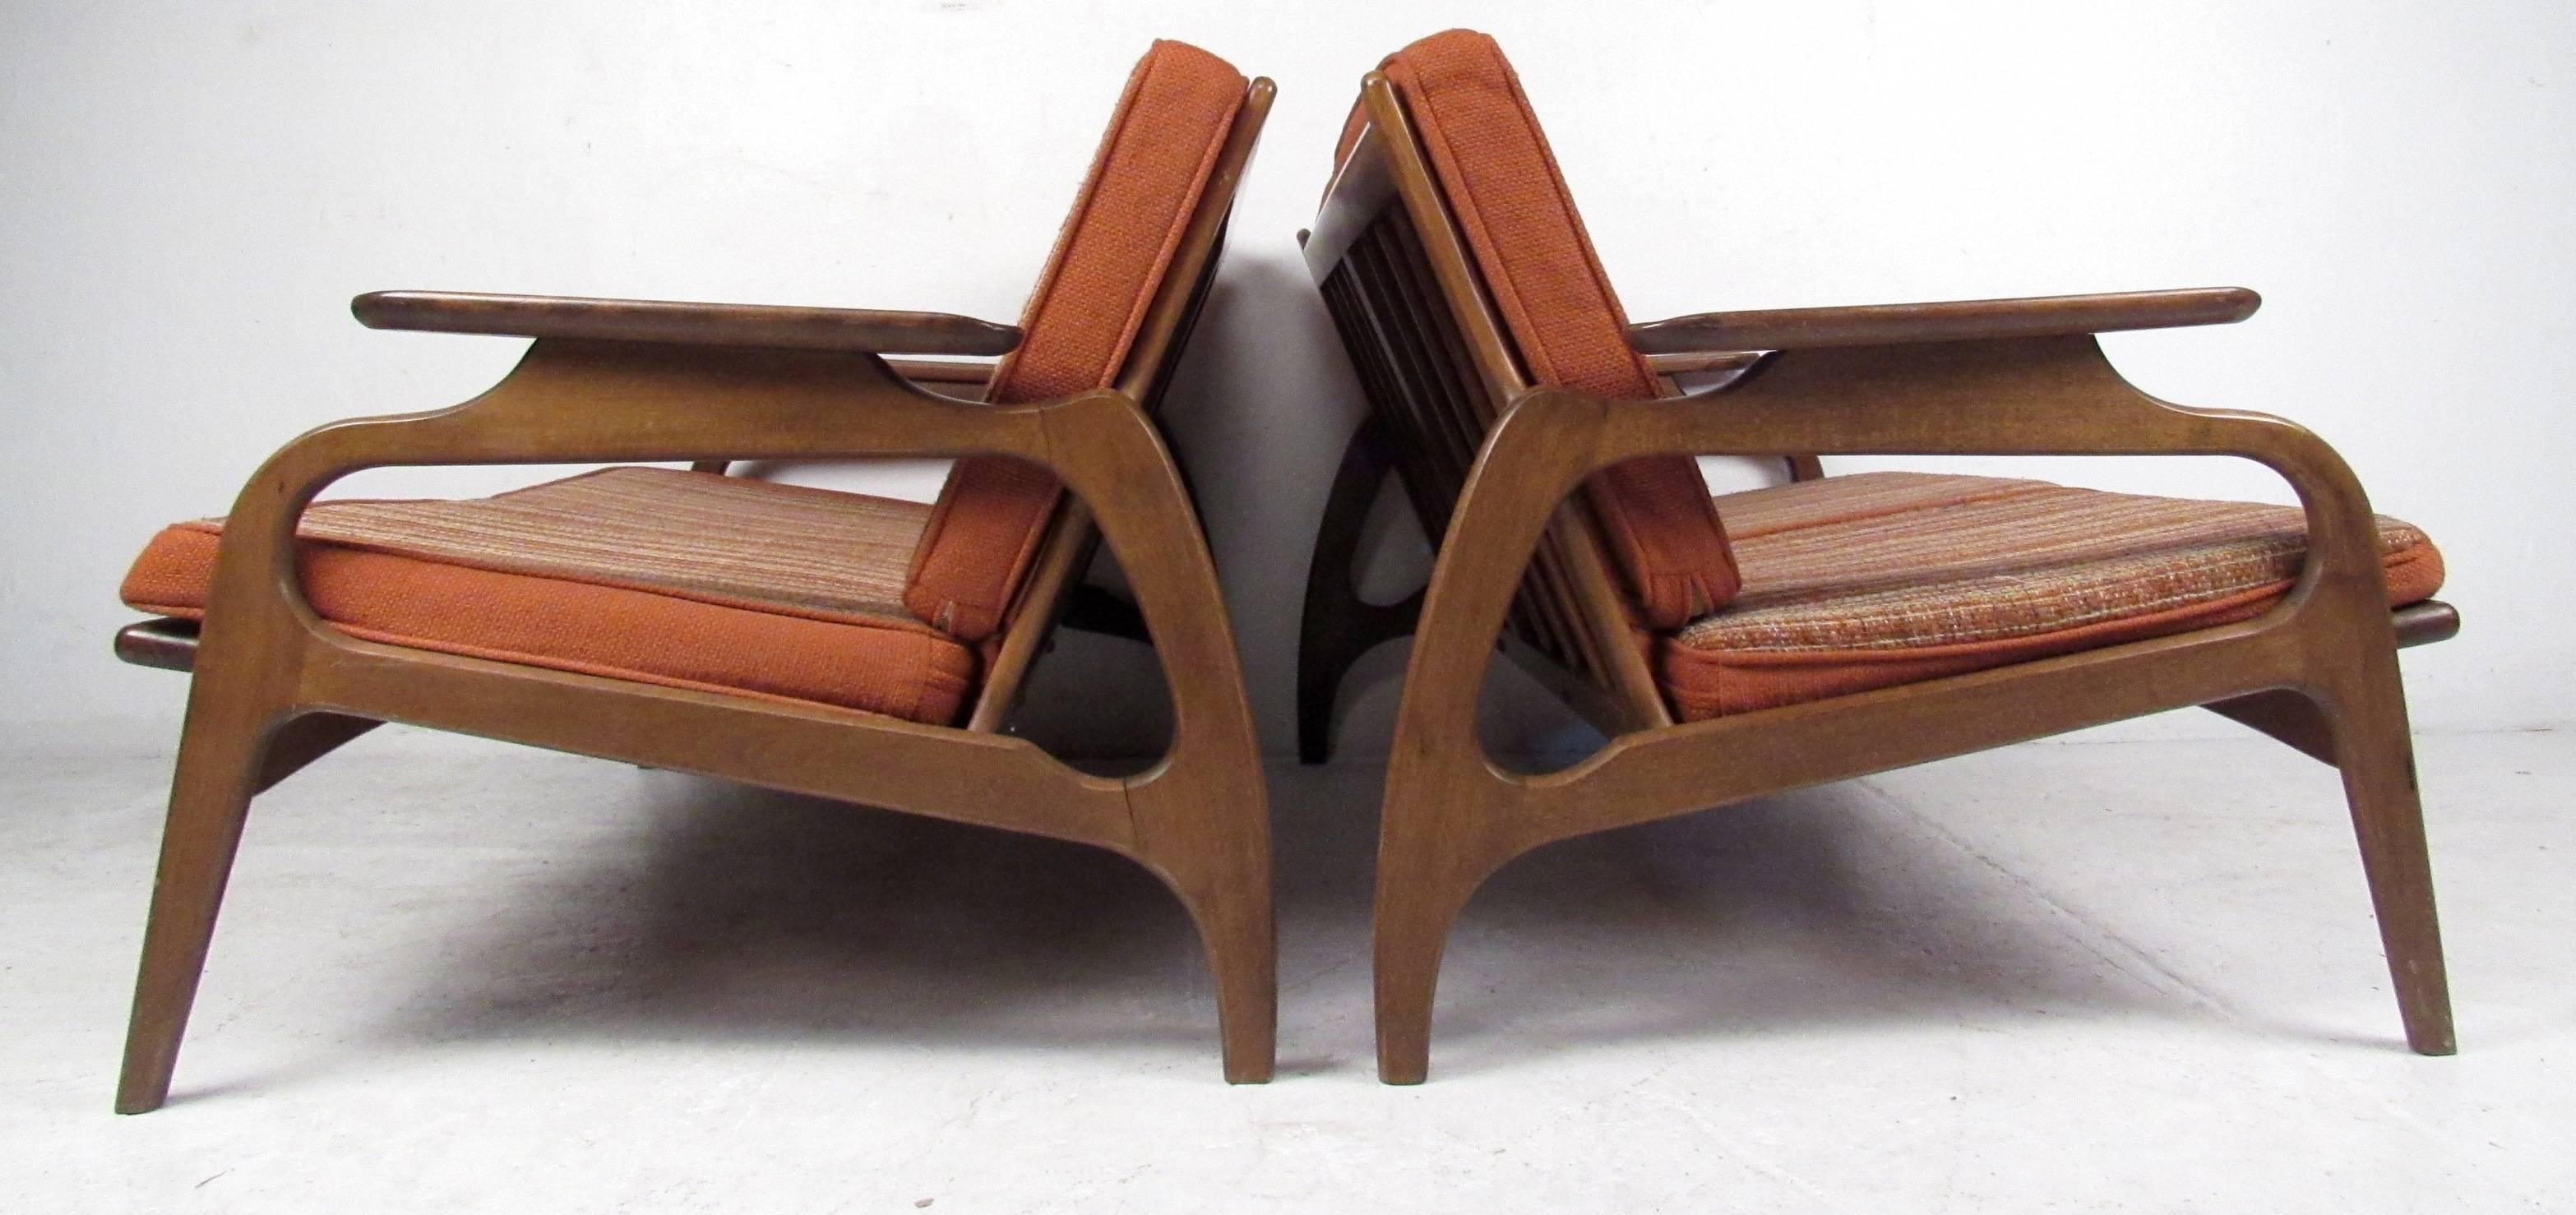 Pair of vintage-modern settees featuring beautifully sculpted walnut arms and legs with removable upholstered cushions.

Please confirm item location NY or NJ with dealer.